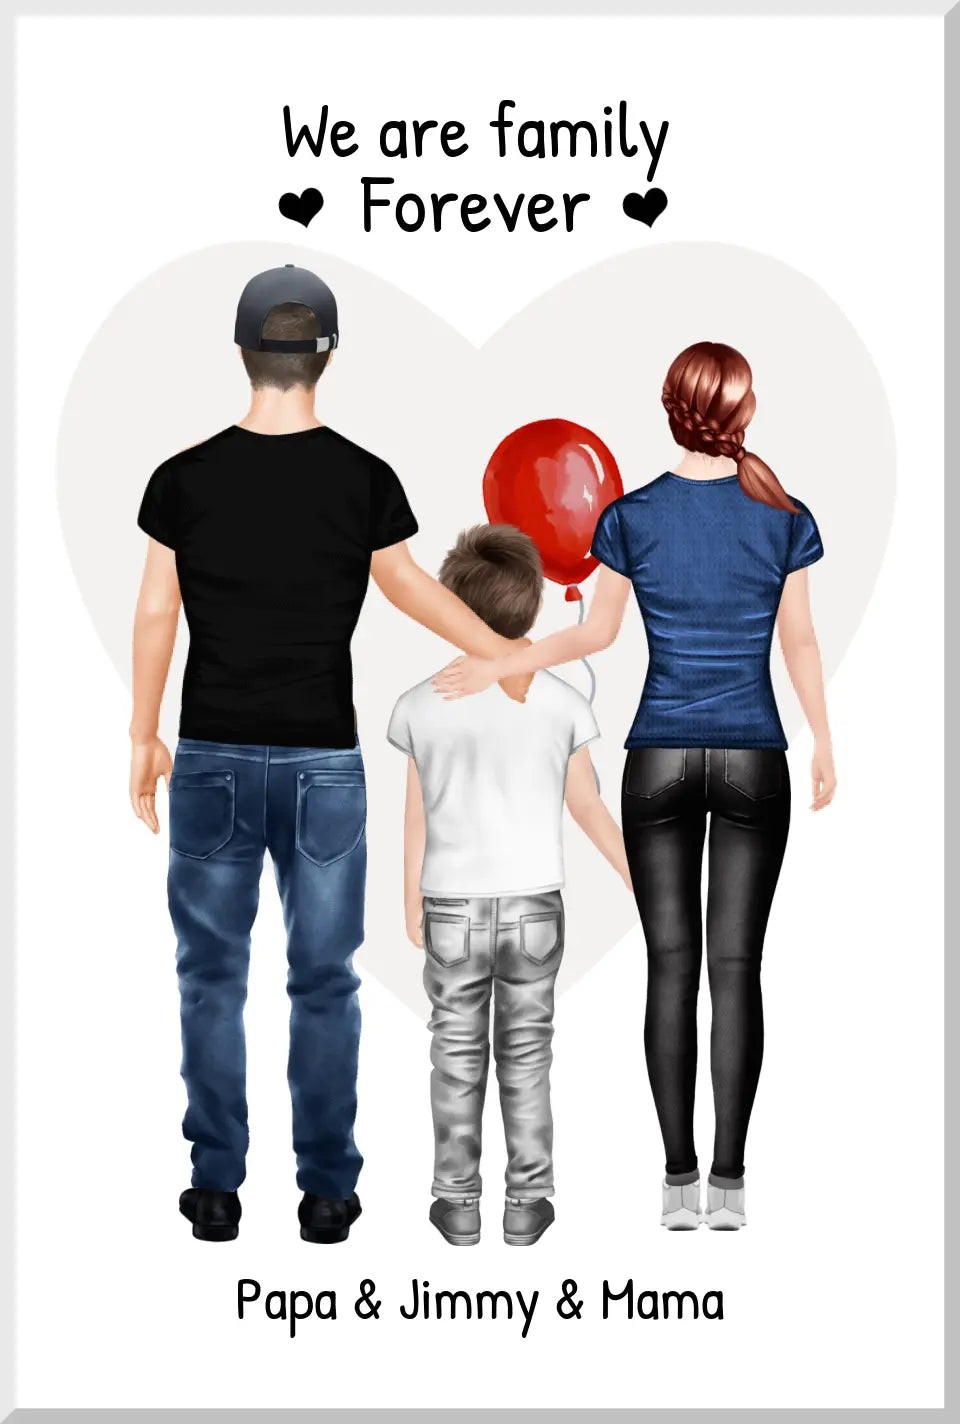 Personalisiertes Poster Geschenk Familie - Familienbild mit 1 Kind - Personalisiertes Familienportrait - We are family